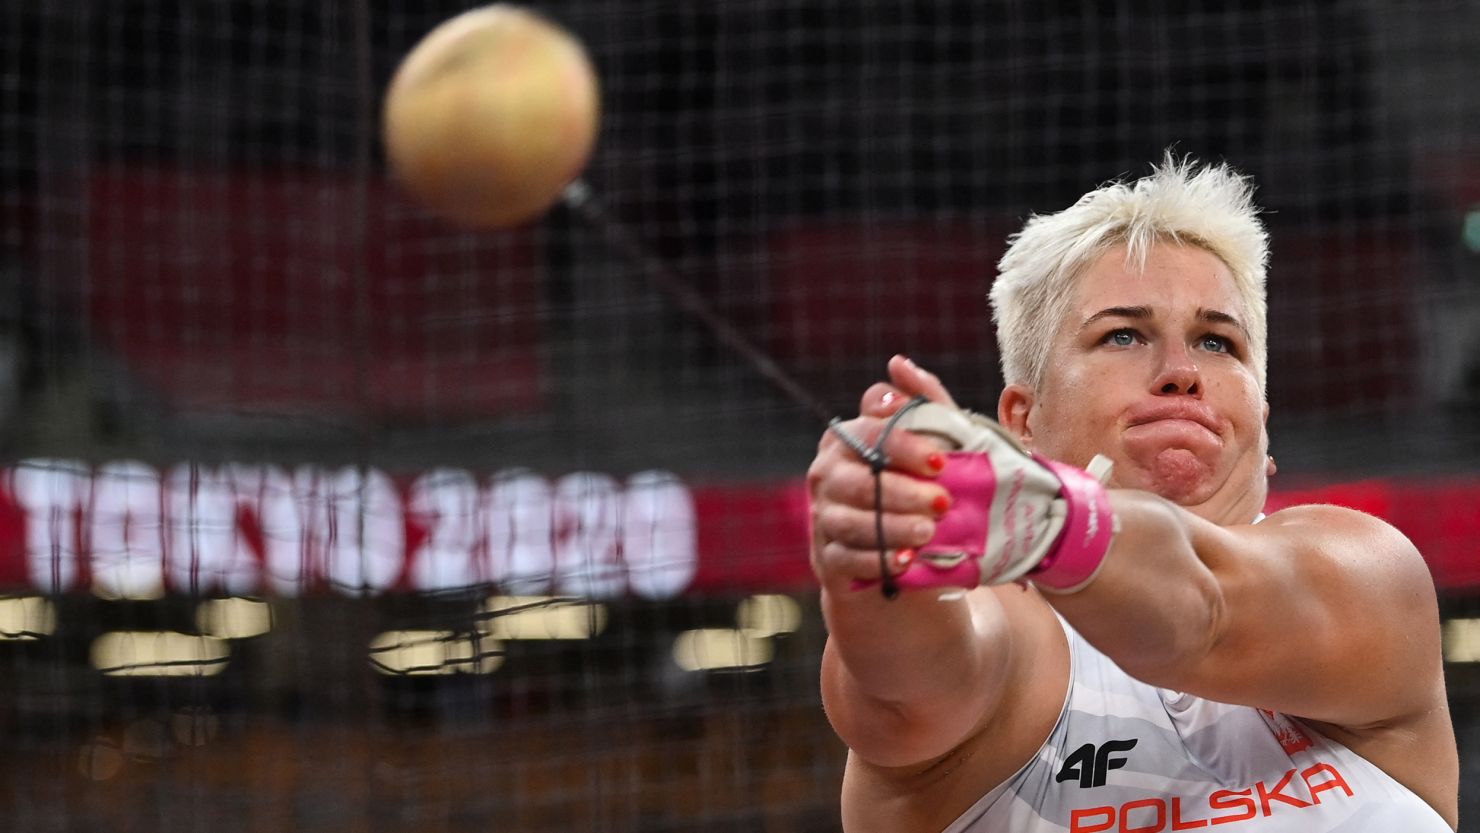 Poland's Anita Wlodarczyk competes in the women's hammer throw final during the Tokyo 2020 Olympic Games at the Olympic Stadium in Tokyo on August 3, 2021. 